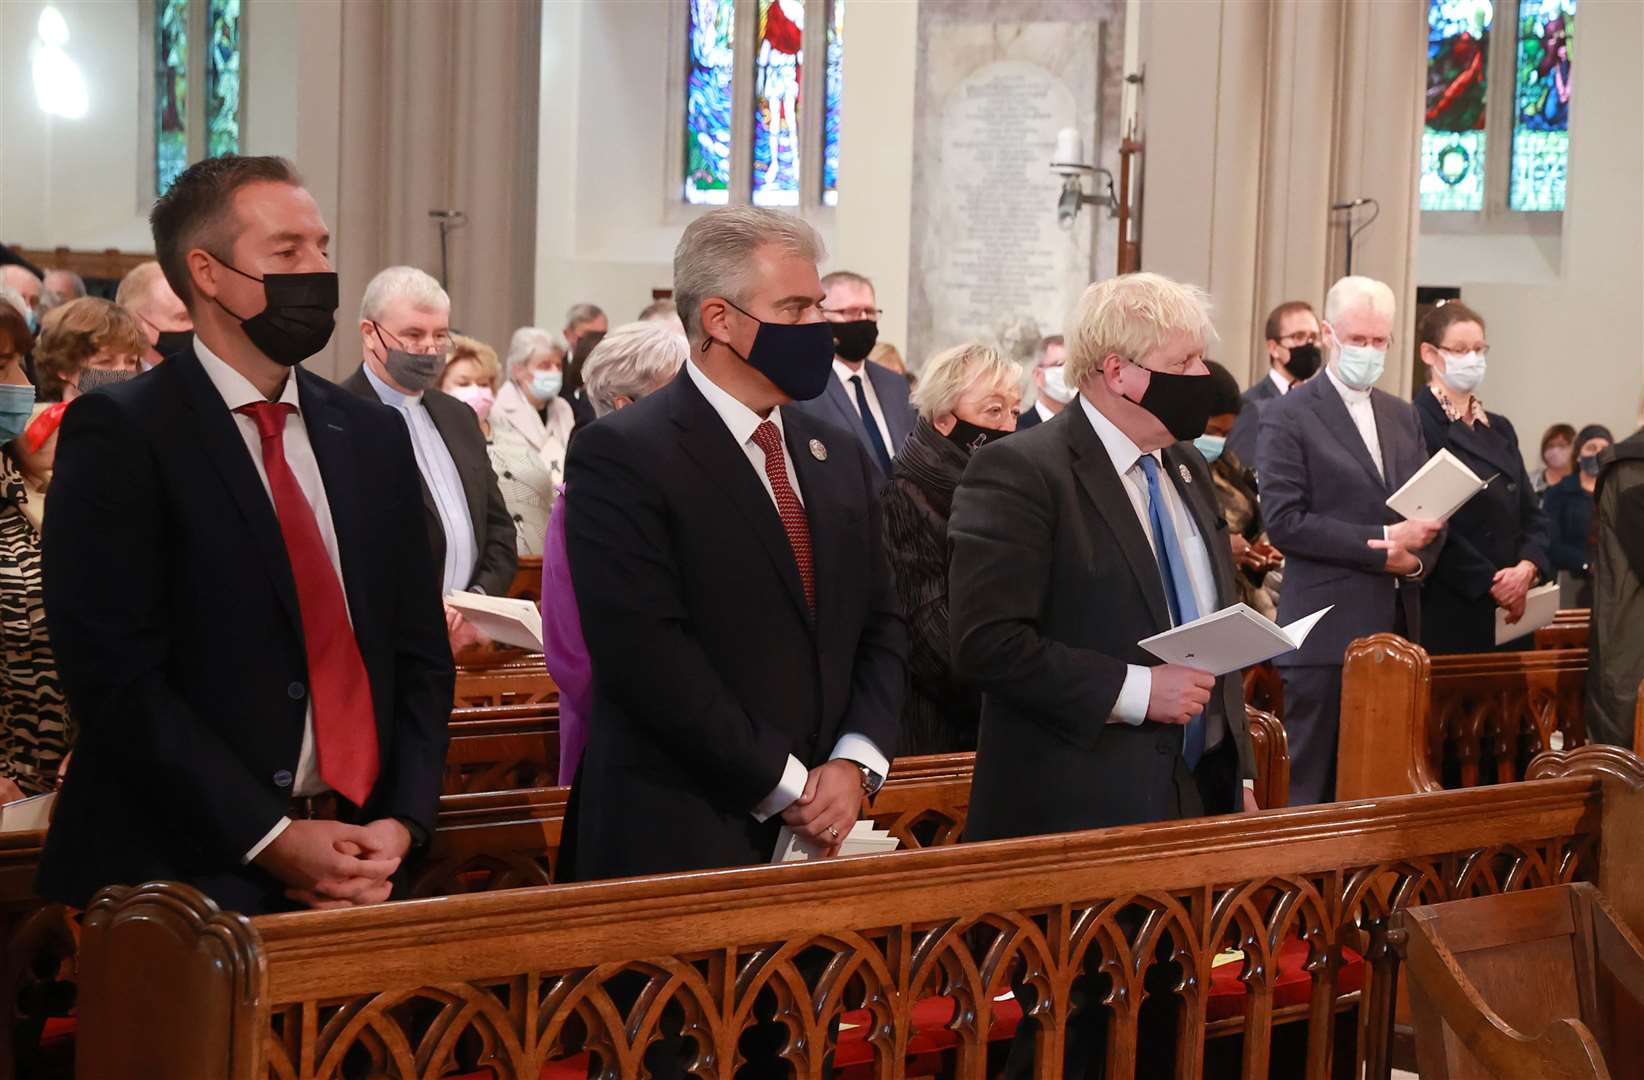 First Minister of Northern Ireland Paul Givan, Secretary of State for Northern Ireland Brandon Lewis and Prime Minister Boris Johnson attending a service to mark the centenary of Northern Ireland at St Patrick’s Cathedral in Armagh (Liam McBurney/PA)